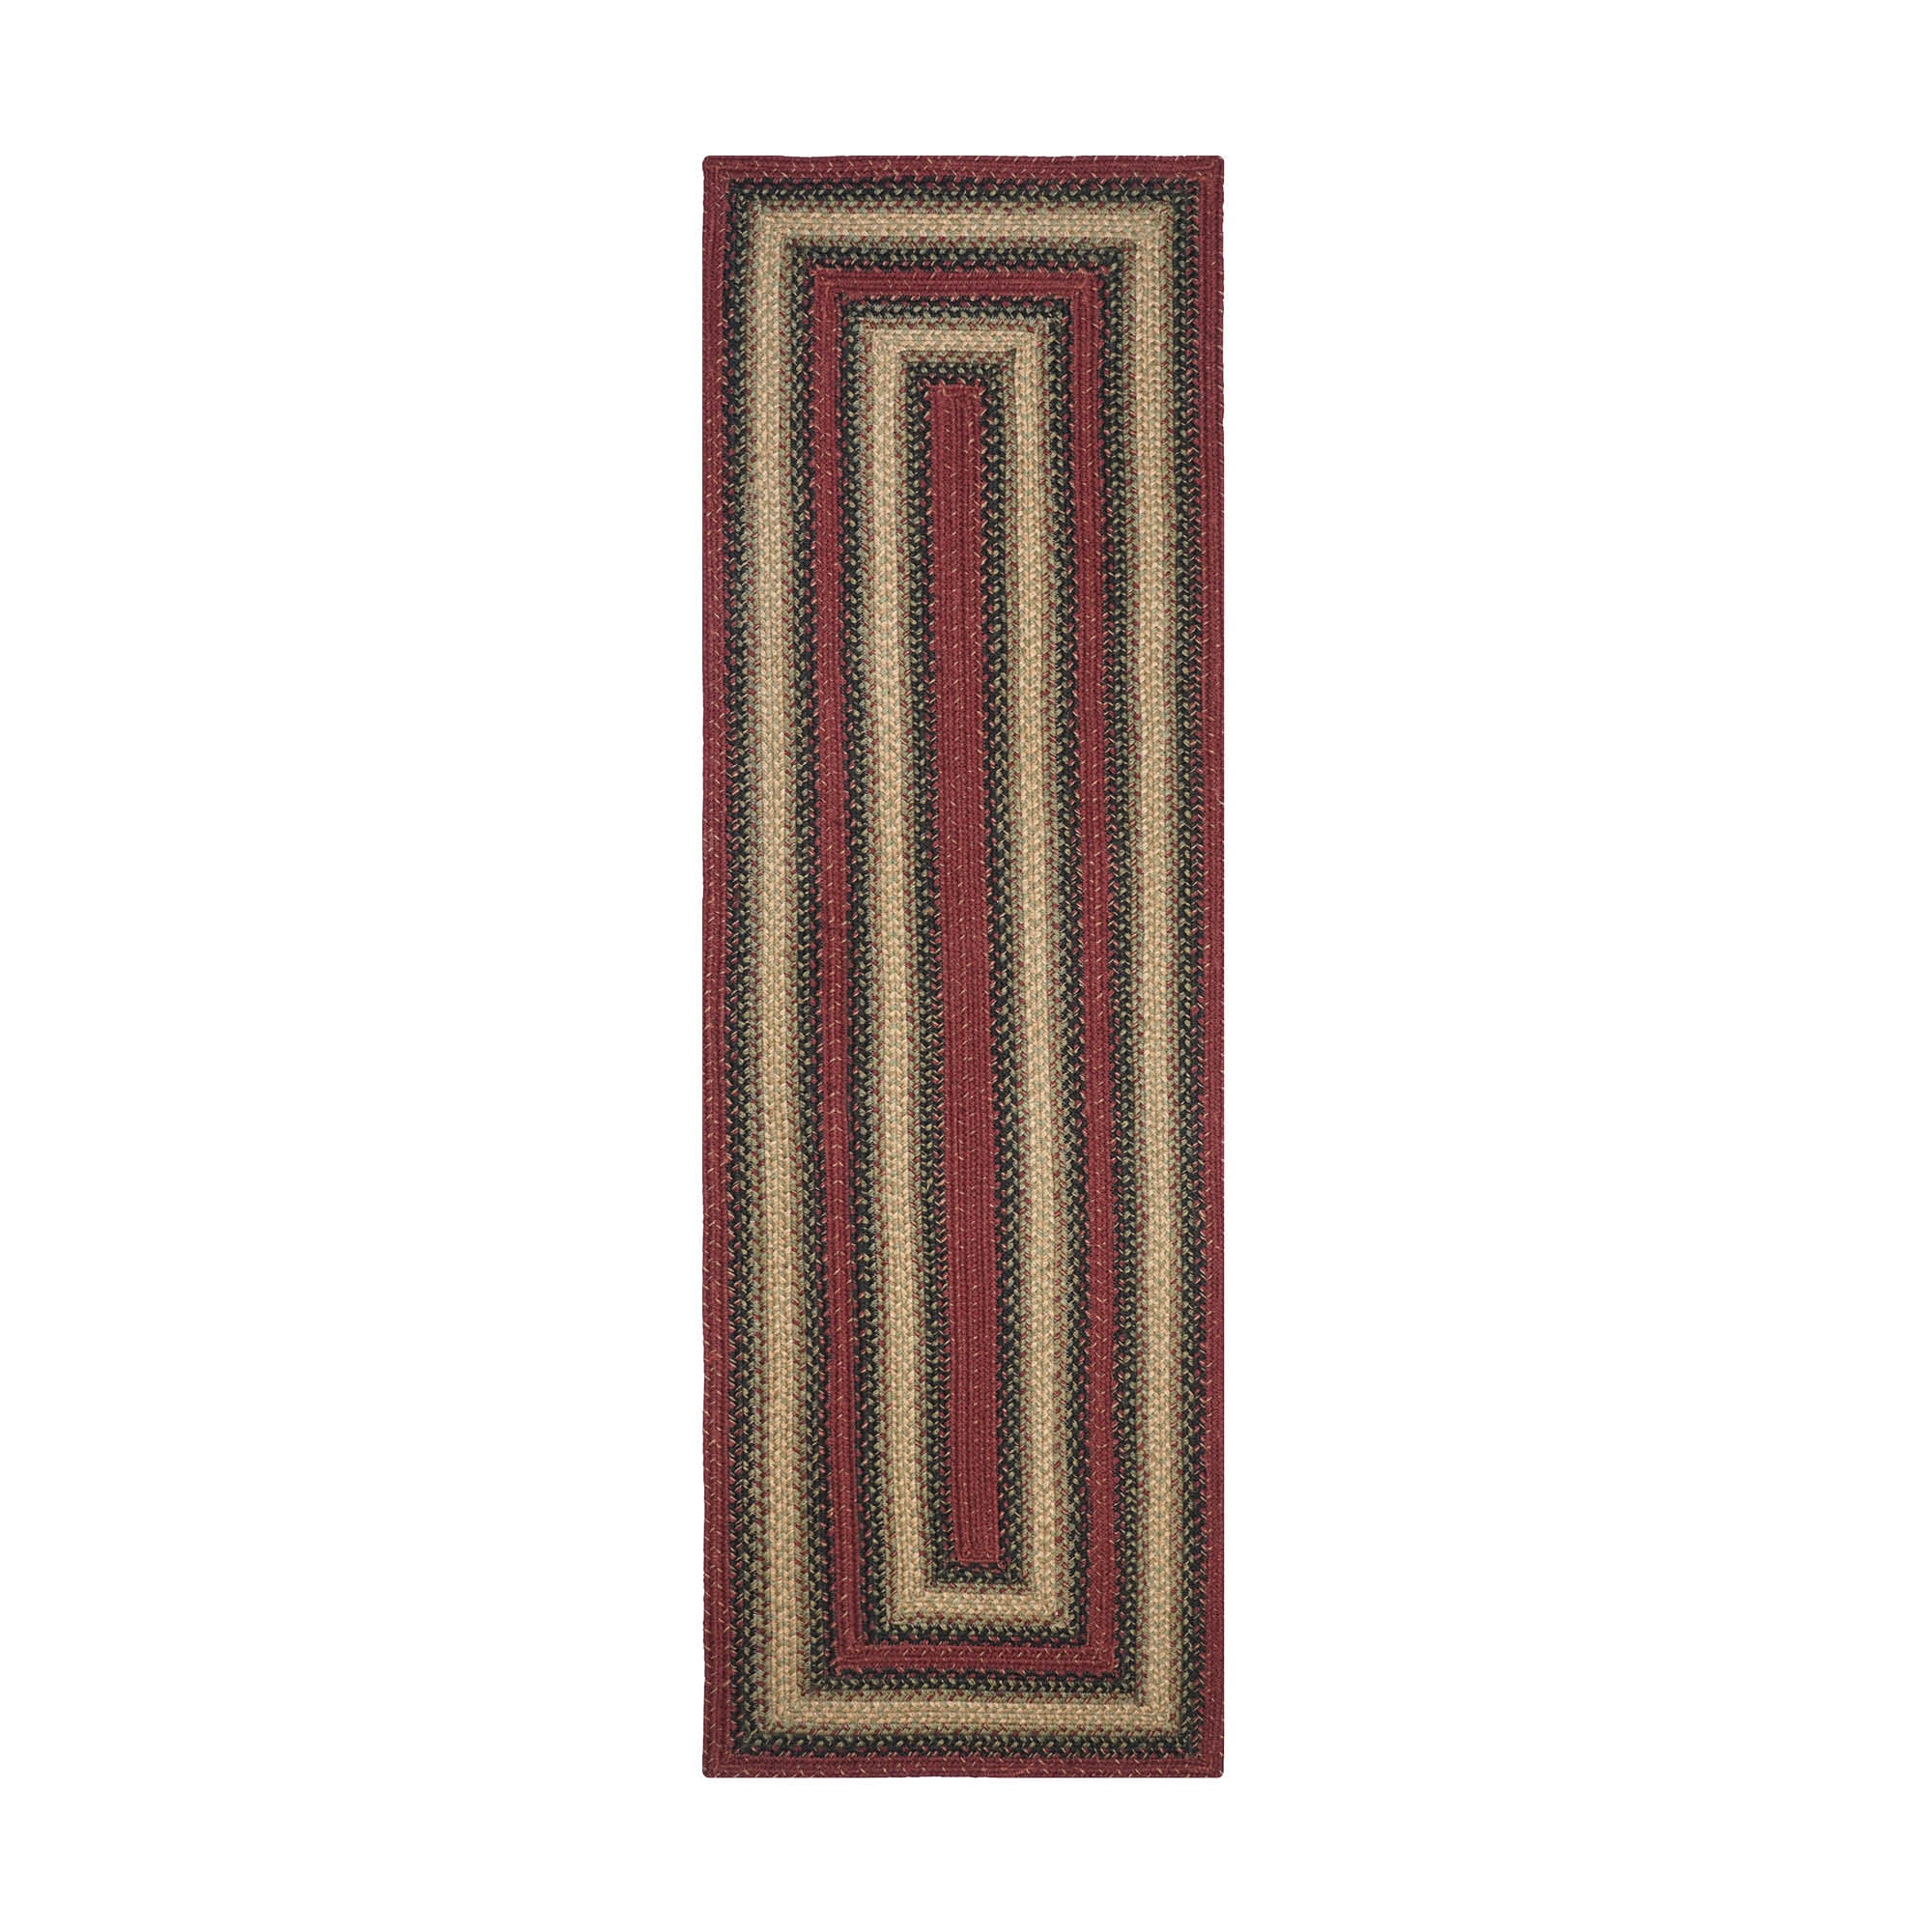 Country Style Braided Jute Rugs - Highland